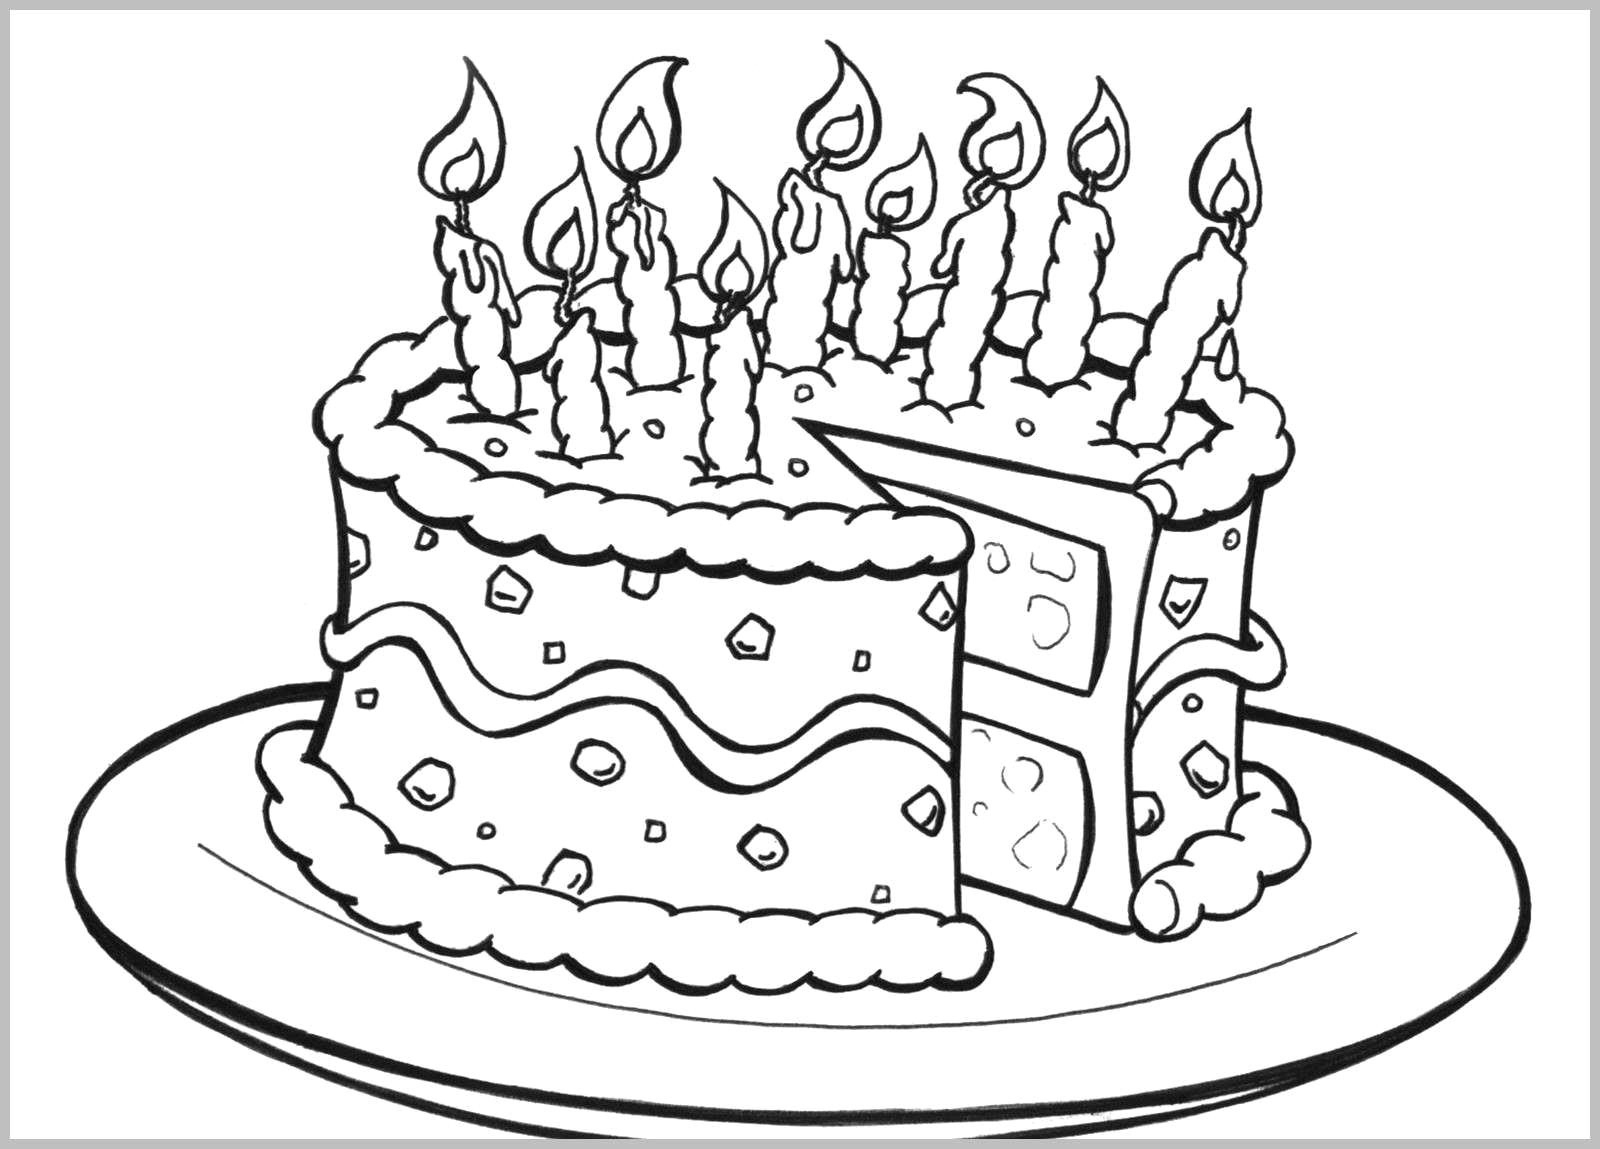 Free Printable Birthday Cake Coloring Pages For Kids Cool2Bkids - Free Printable Pictures Of Birthday Cakes